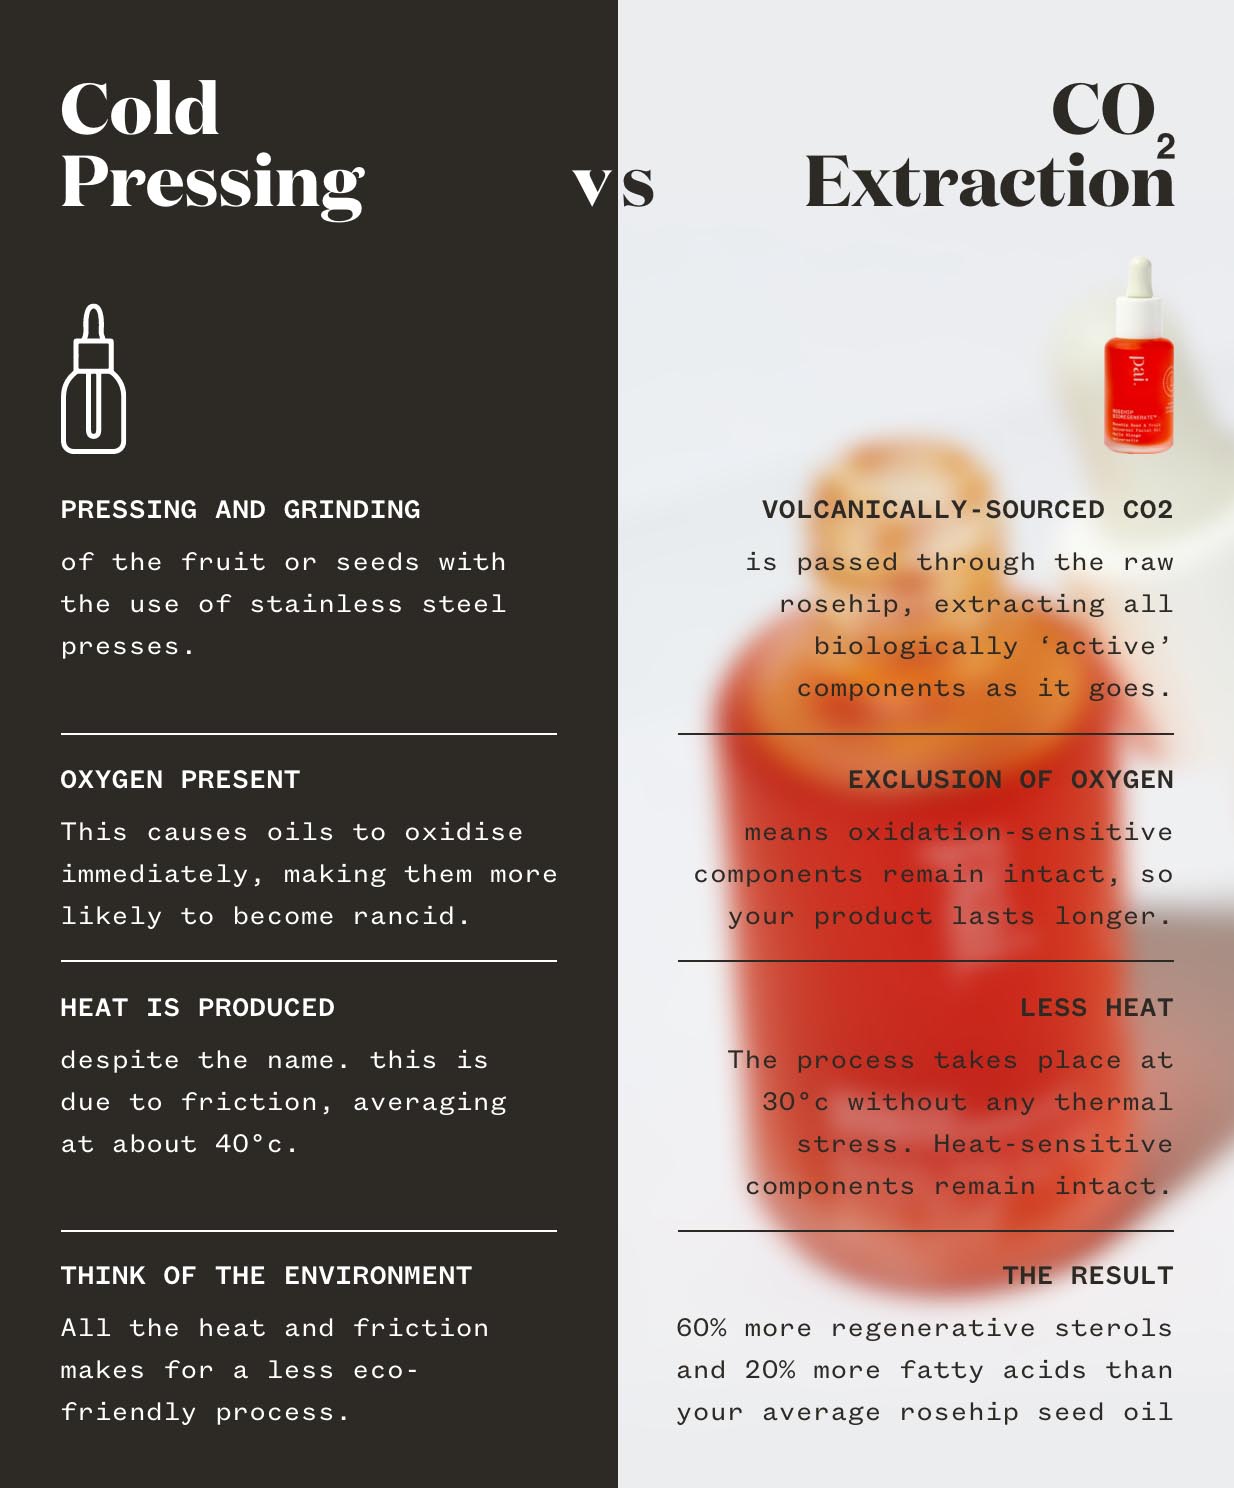 cold pressed vs co2 extraction